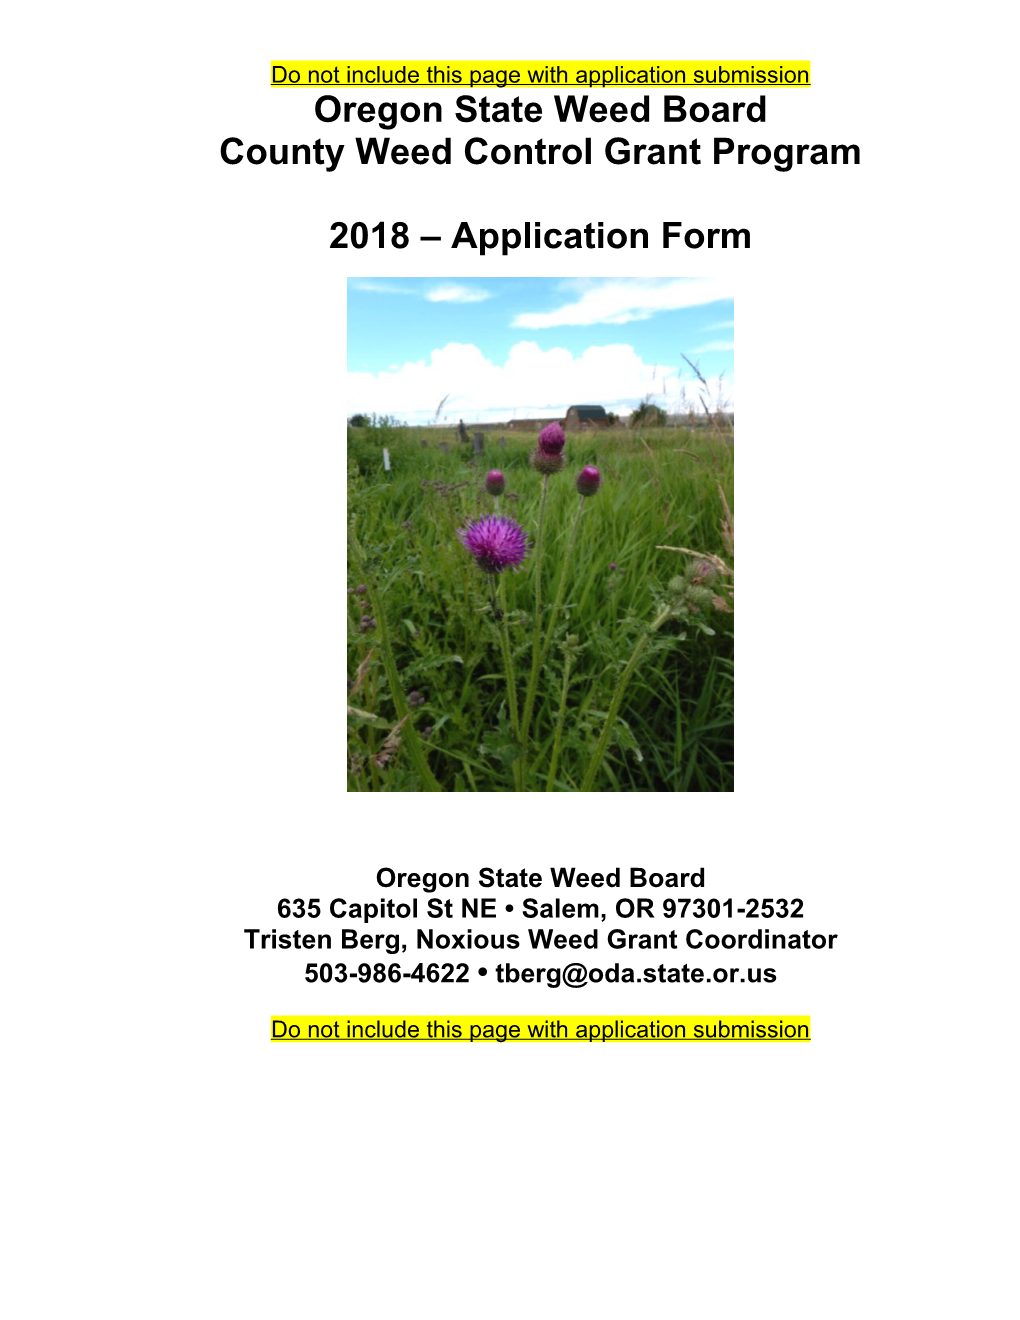 Oregon State Weed Board County Weed Control Grant Application